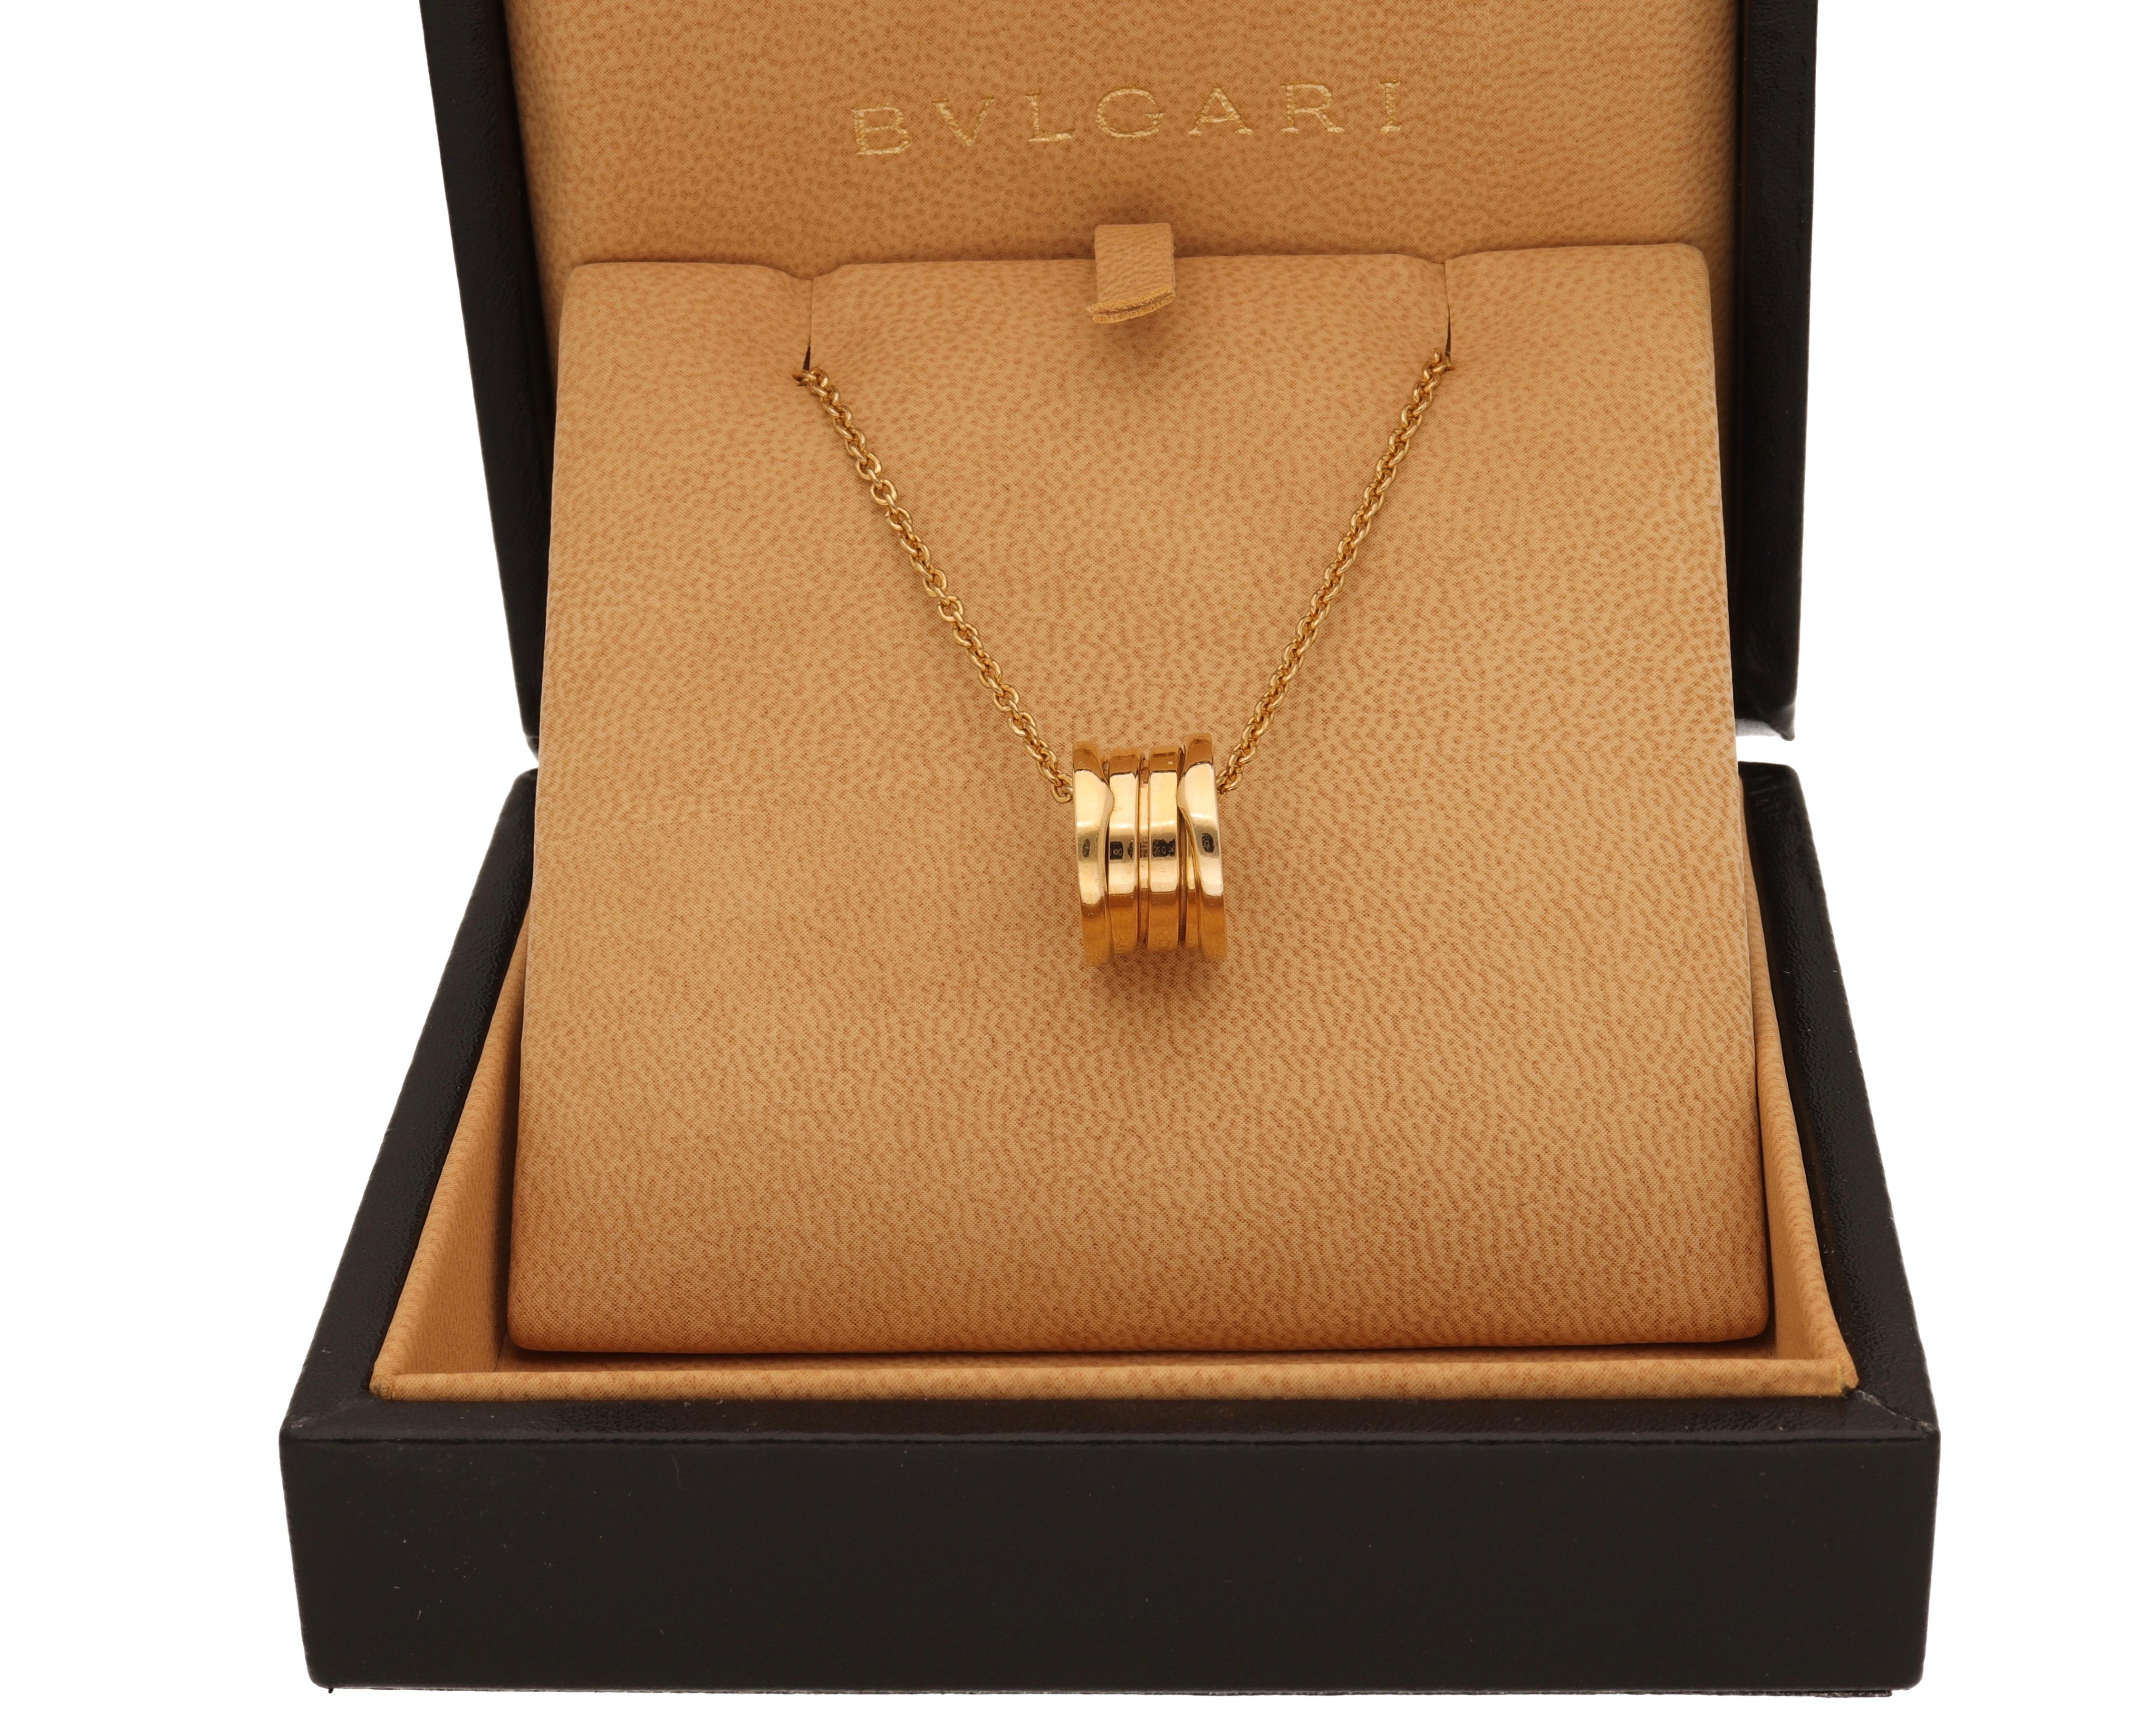 B.Zero1 18 kt. yellow gold pendant necklace signed by Bulgari.
This iconic design is one of the best sellers of Bulgari.
Drawing its inspiration from the world's most renowned amphitheatre, the Colosseum, B.zero1 is a groundbreaking statement of